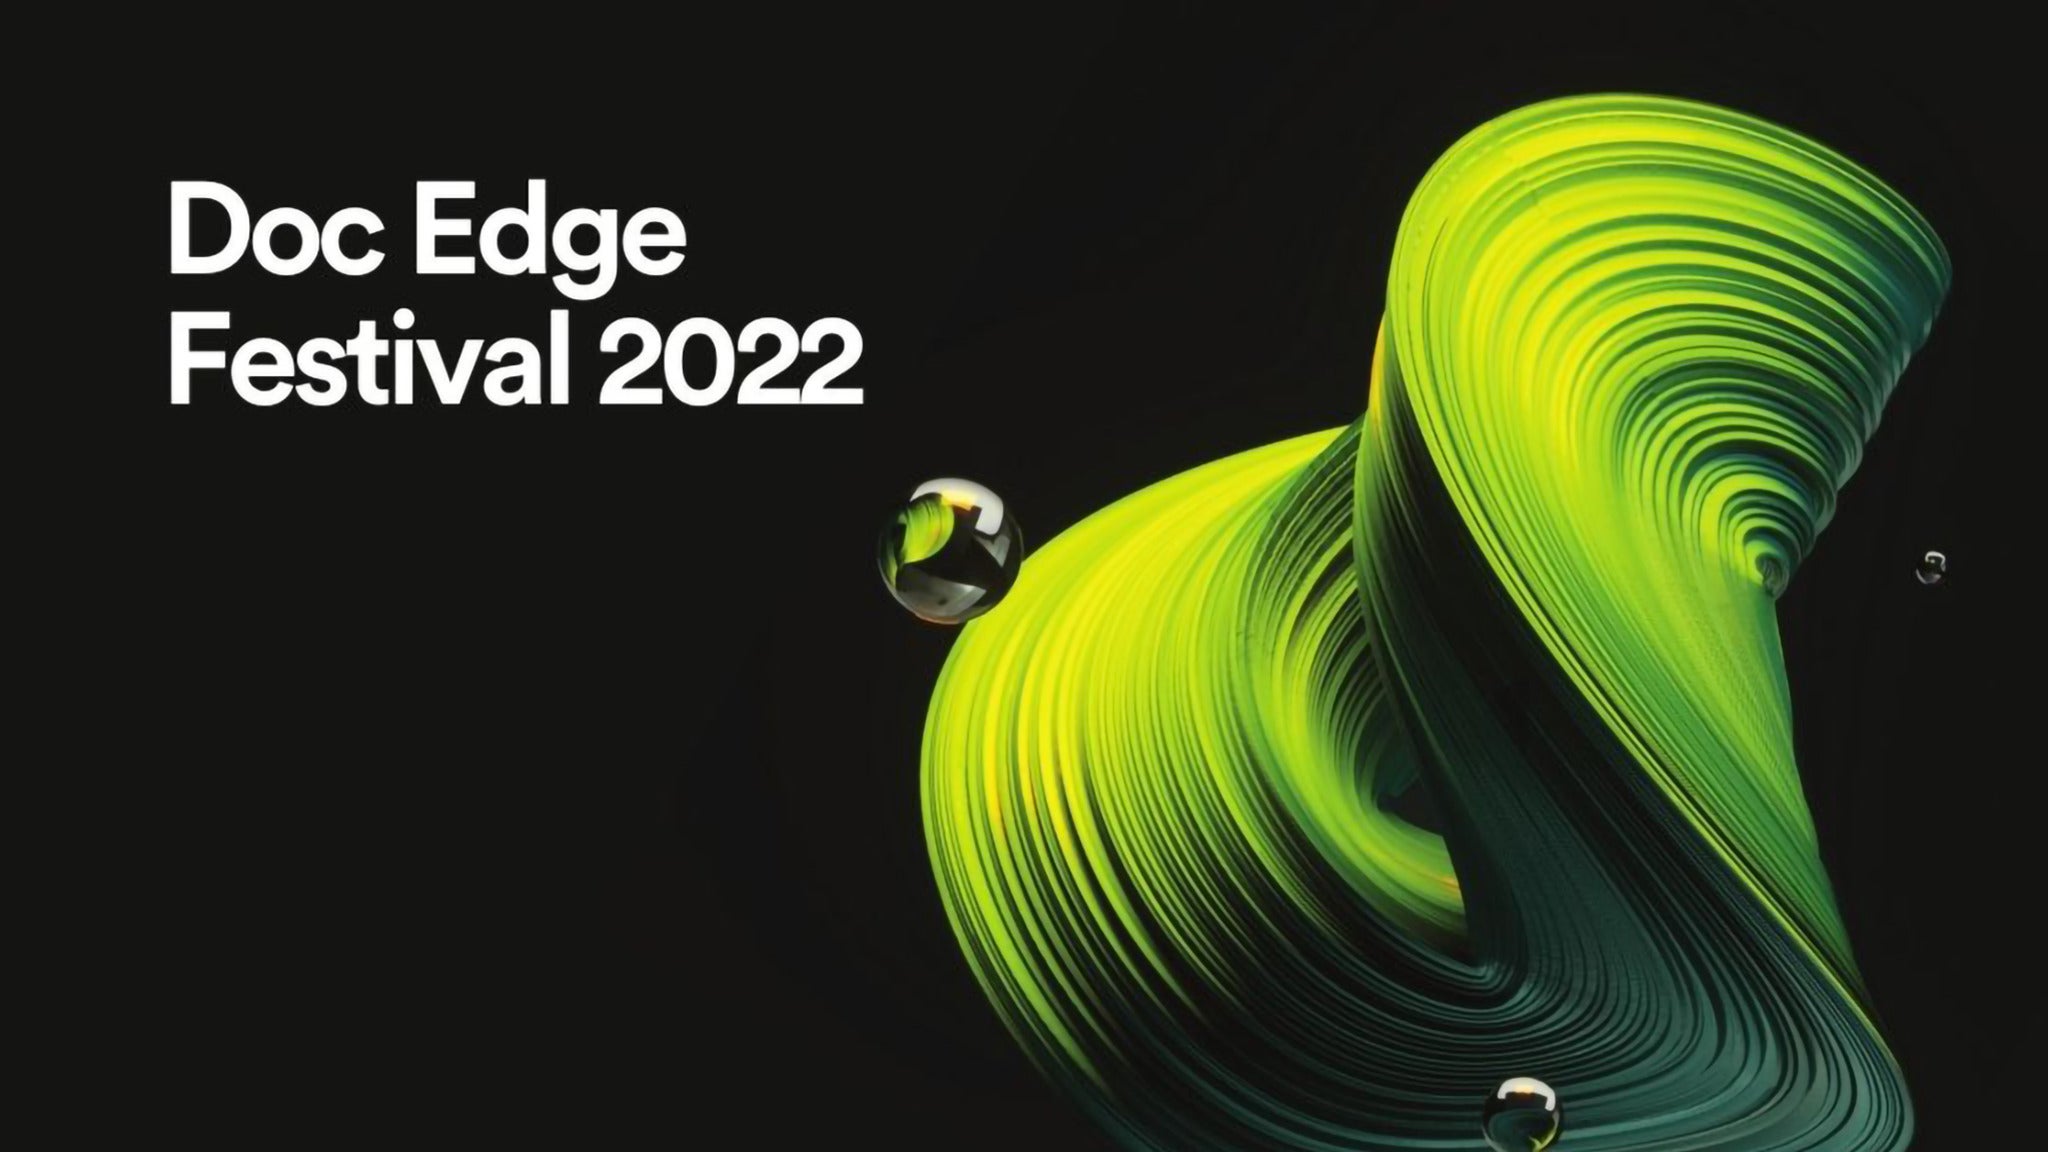 Image used with permission from Ticketmaster | Doc Edge Film Festival 2022: Pushing Boundaries tickets